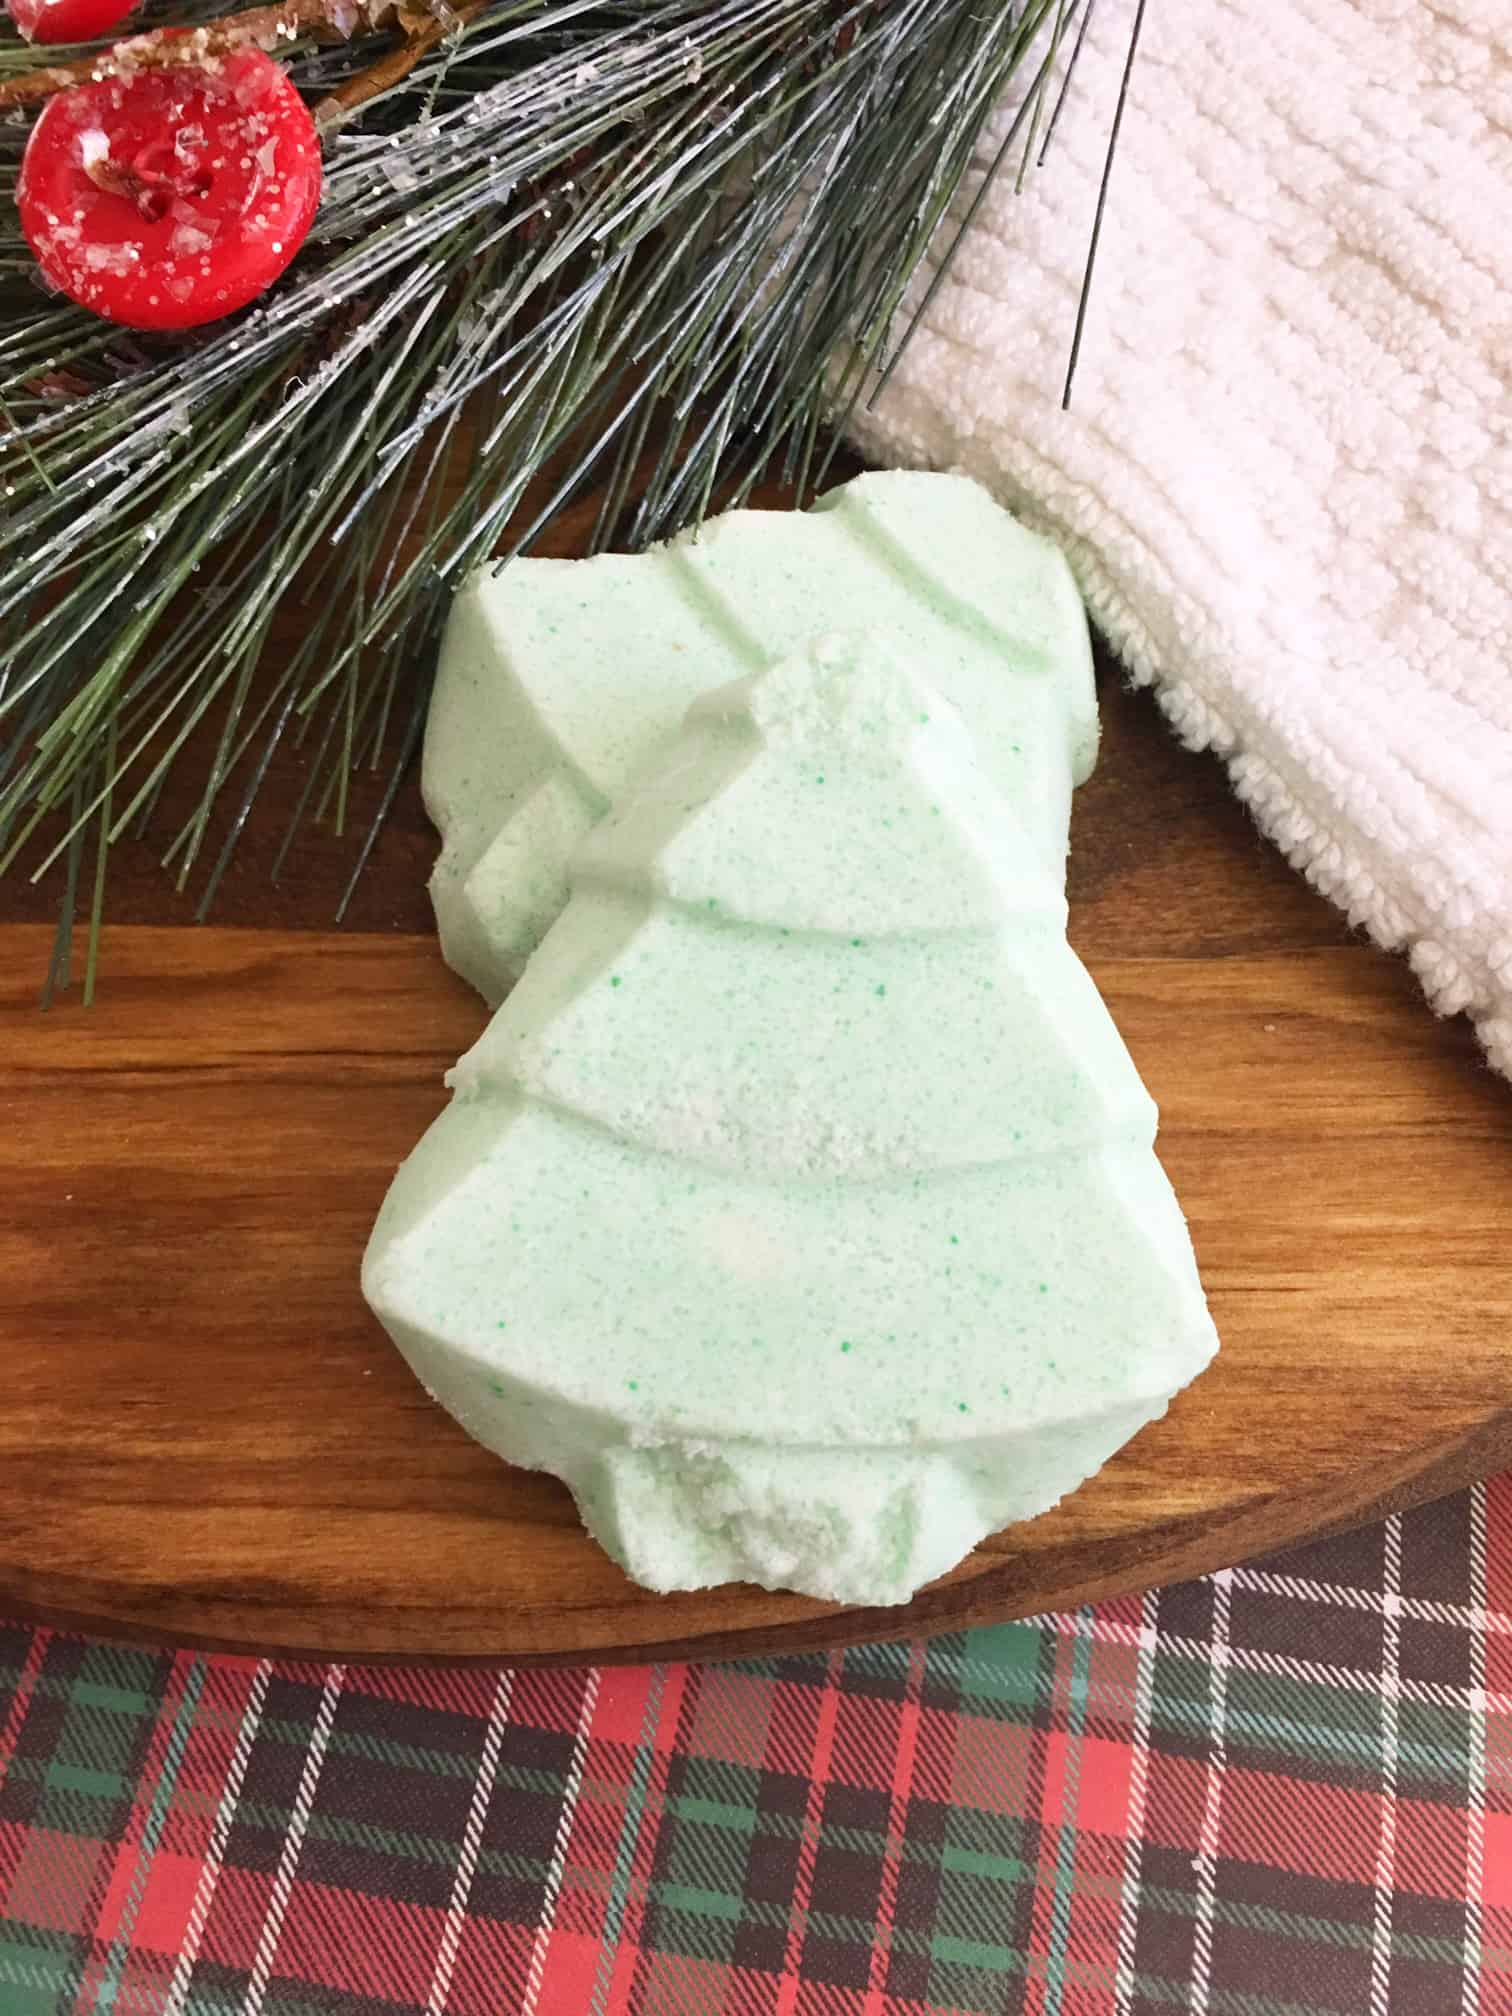 The best bath bomb recipe and a LUSH copycat! Learn how to make the best DIY bath bombs recipe easy that is great for pampering yourself or homemade gifts!